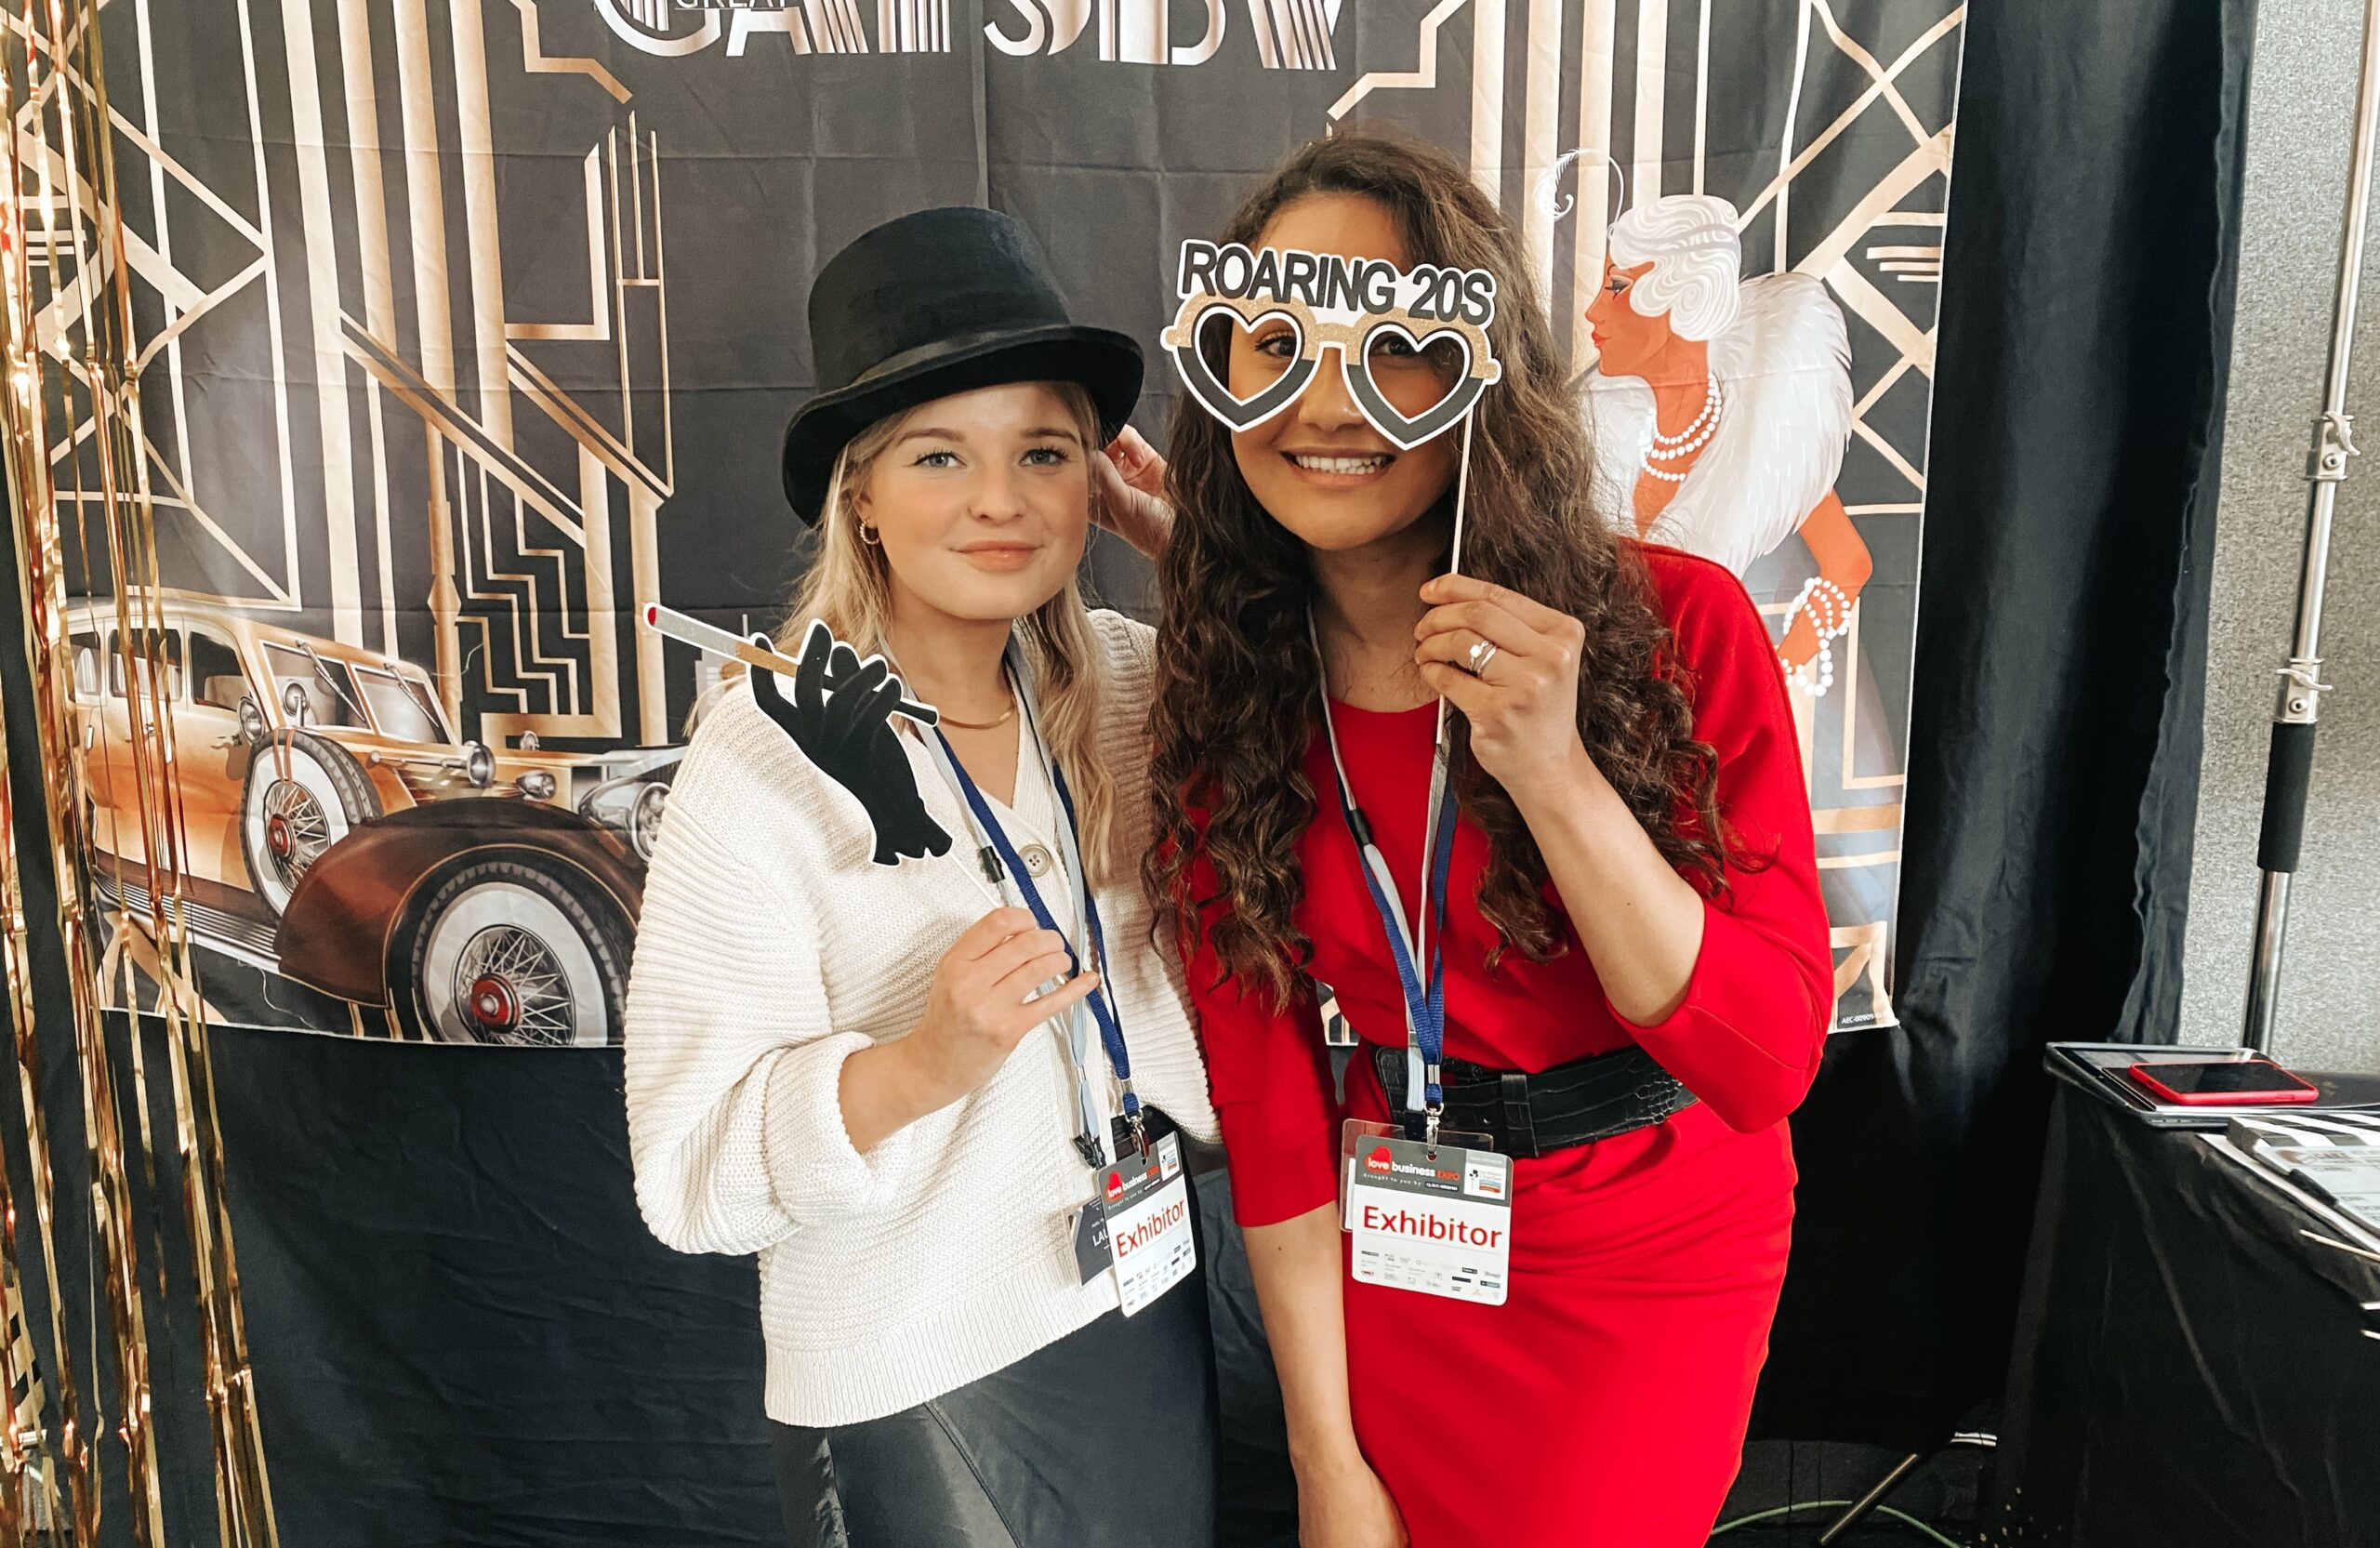 Roaring 20's photobooth @ Love Business EXPO 2022